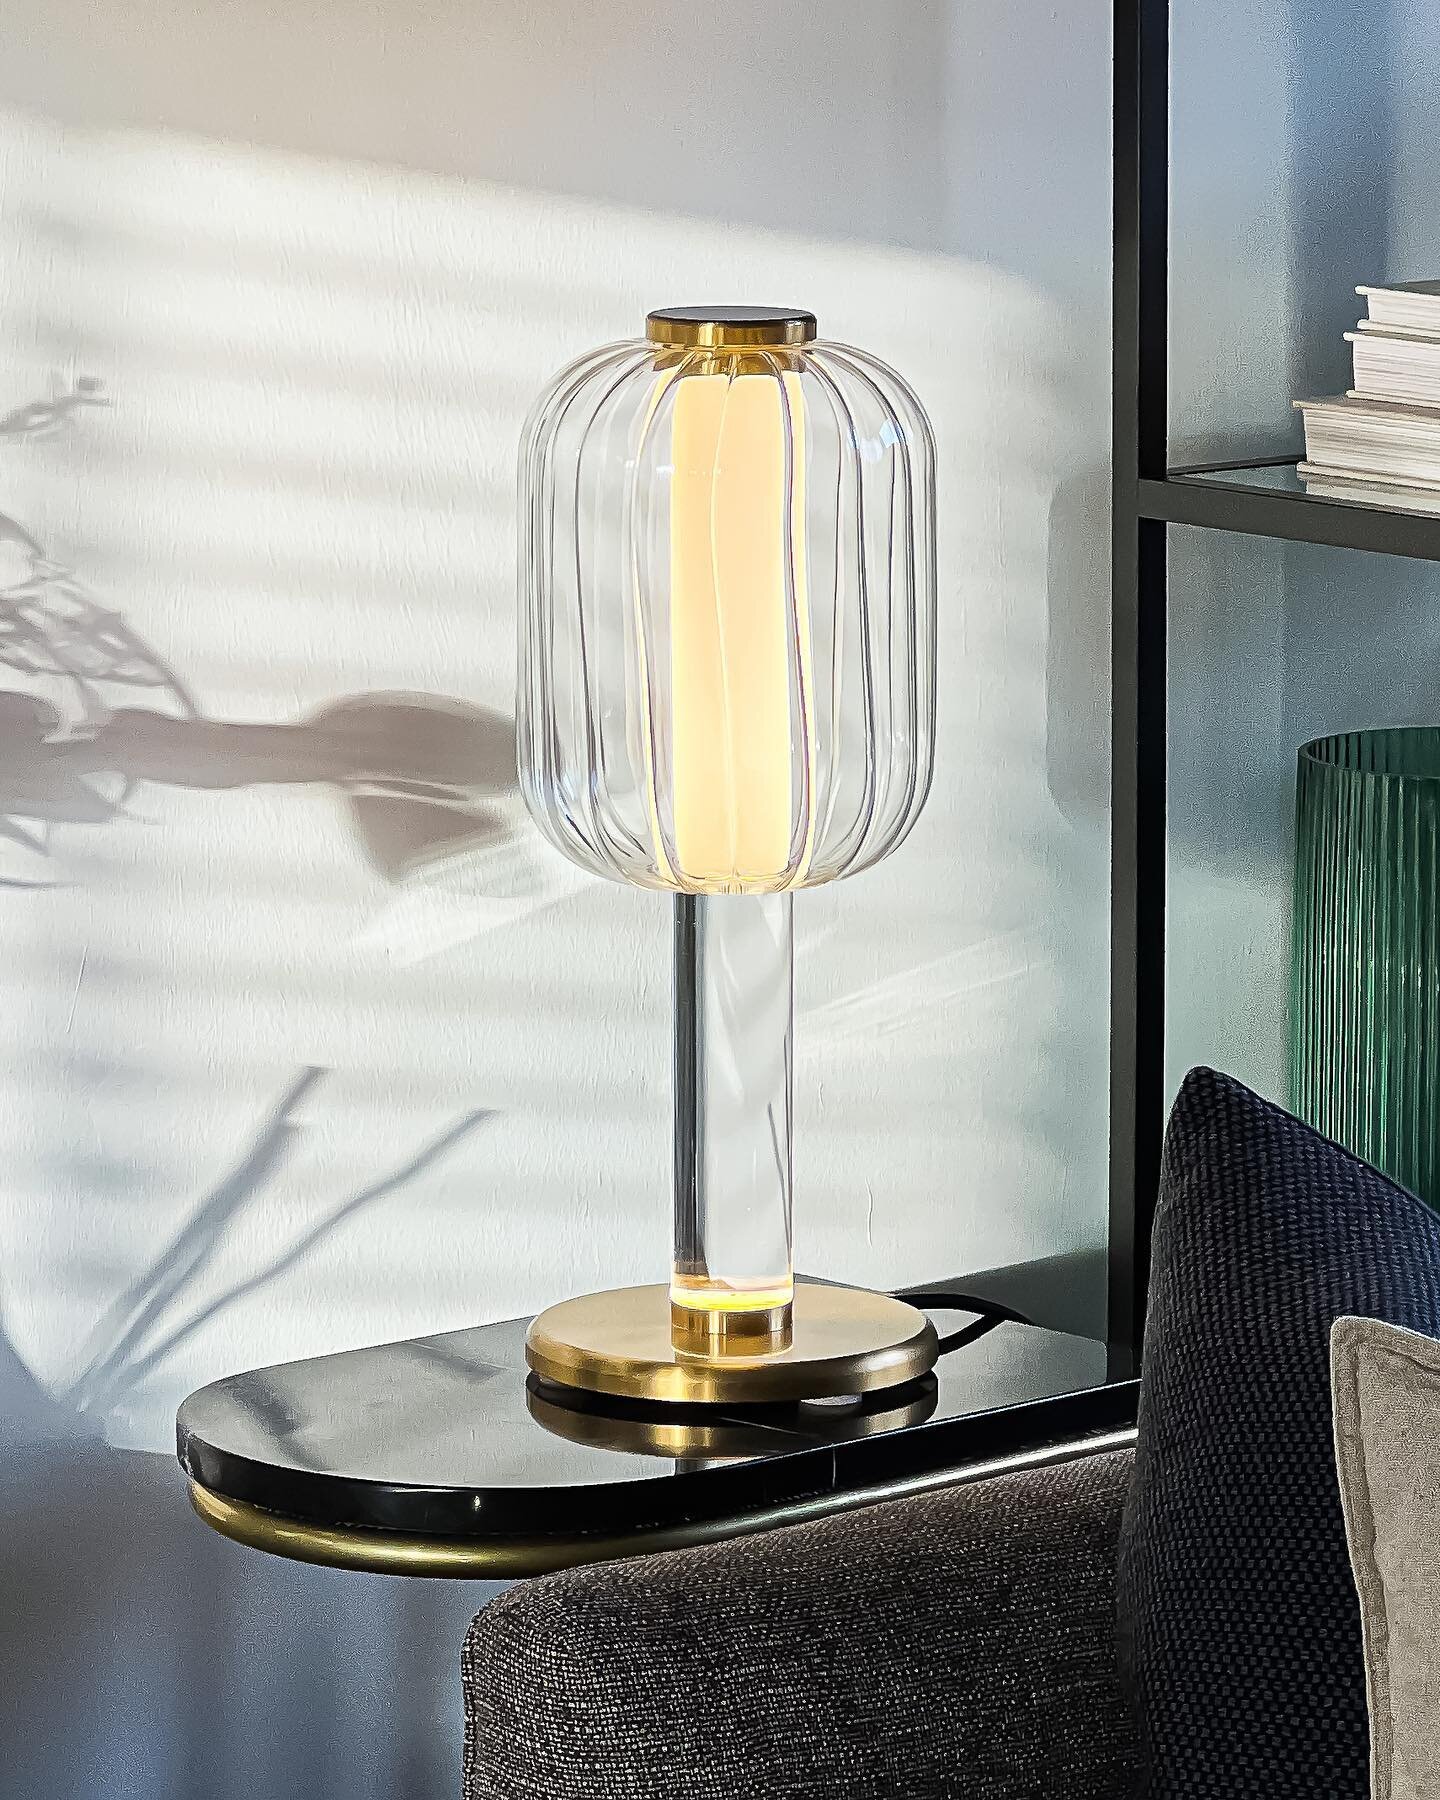 A personal favorite and our debut product, the ALMA Table Lamp, was launched in late November 2021. Seen here on a living room side table, setting a cosy ambiance.

The lamp playfully explores optical illusions using perspex TIR as a lighting guide, 